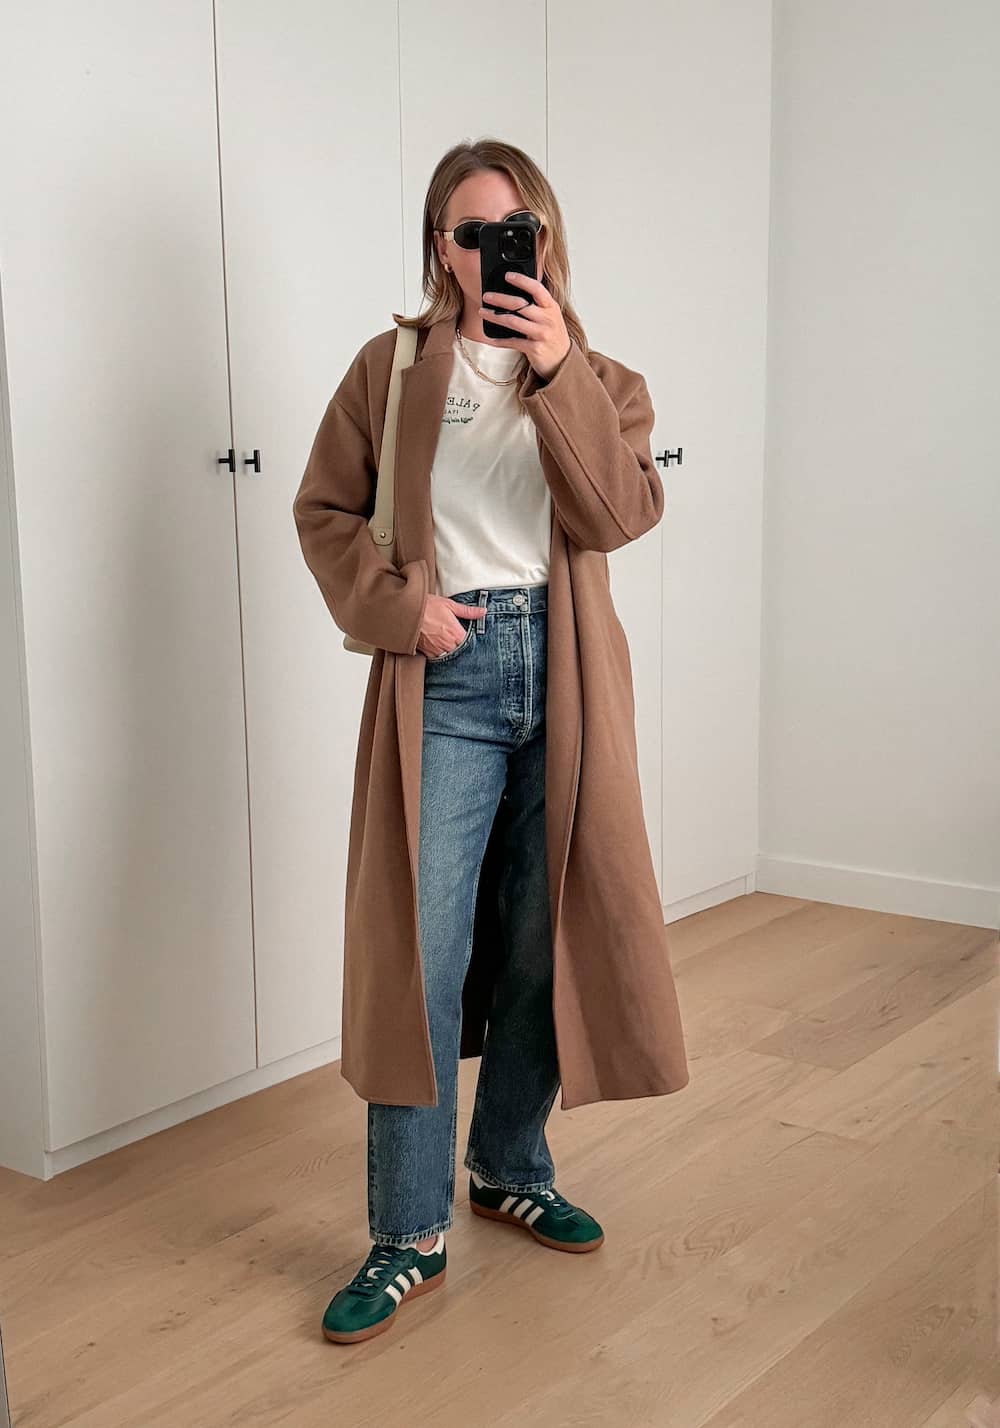 Christal wearing jeans, a white tee, a brown duster coat and green sneakers.